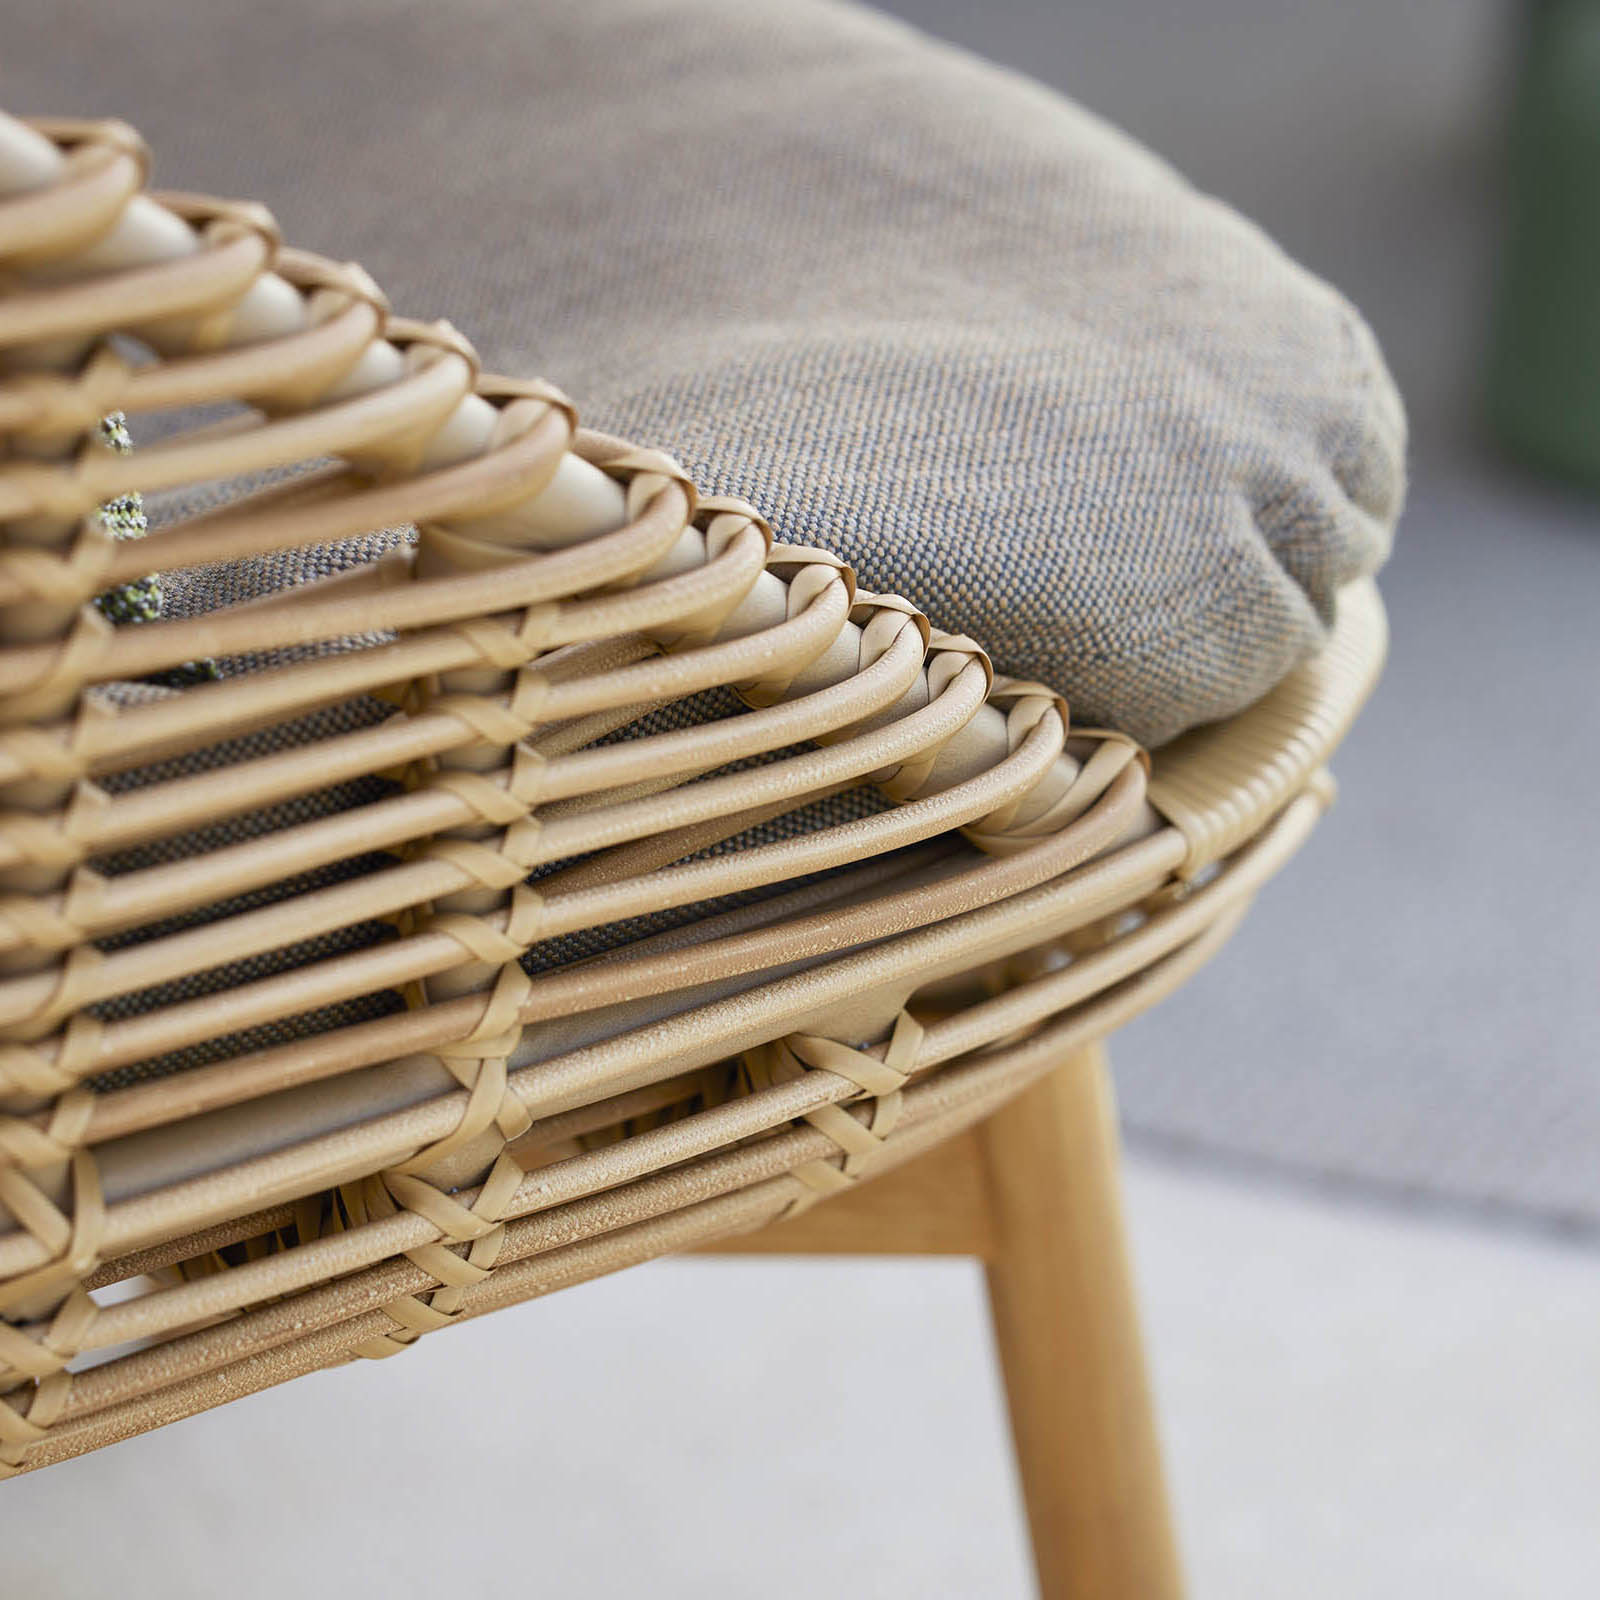 Hive Loungesessel aus Cane-line Weave in Natural mit Kissen aus Cane-line Link in Light Green